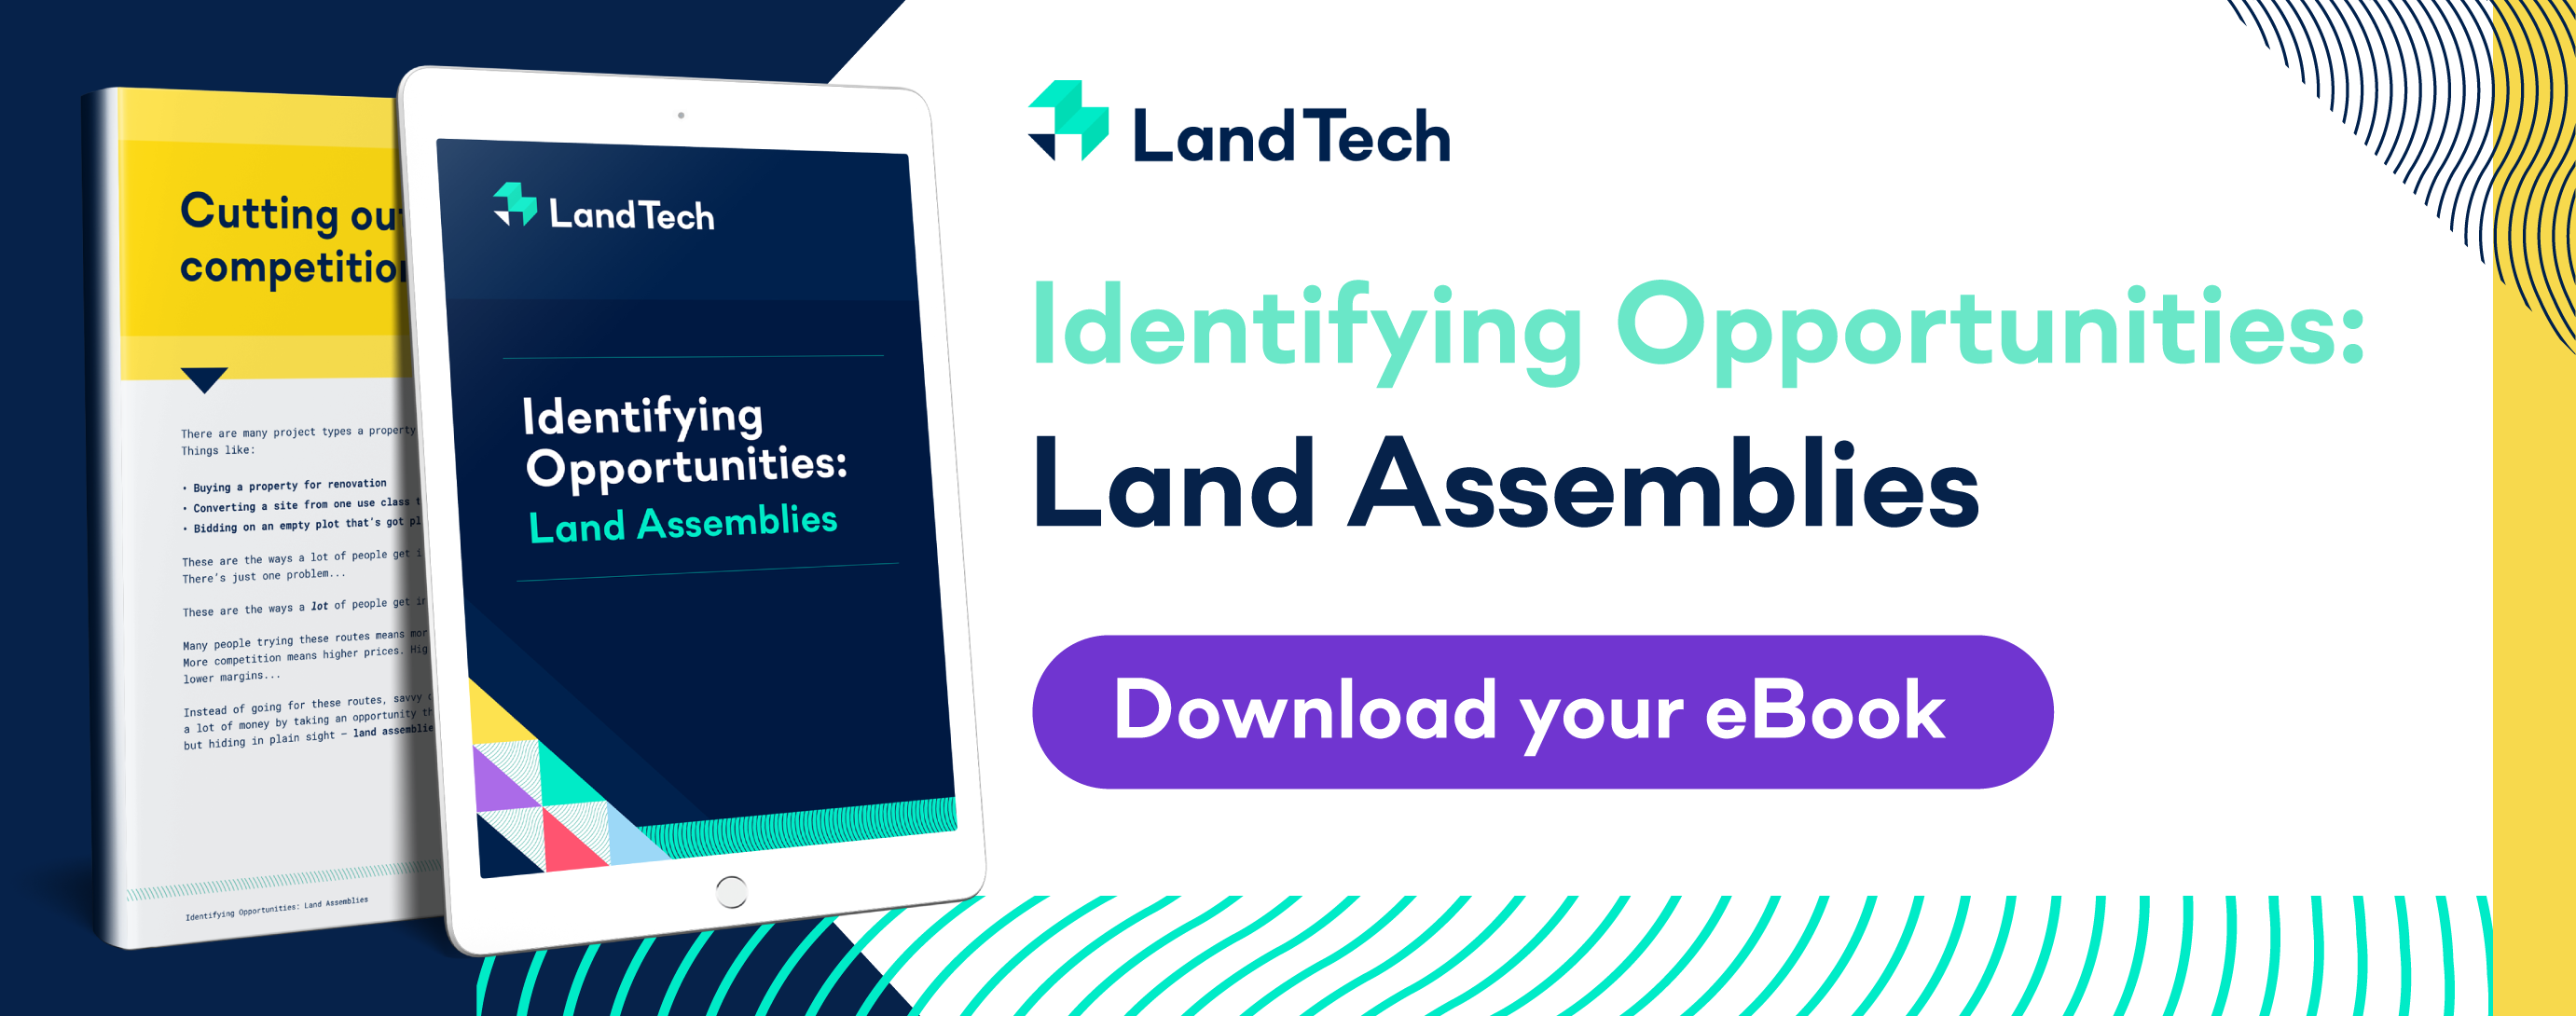 land_assembly_ebook_download-01